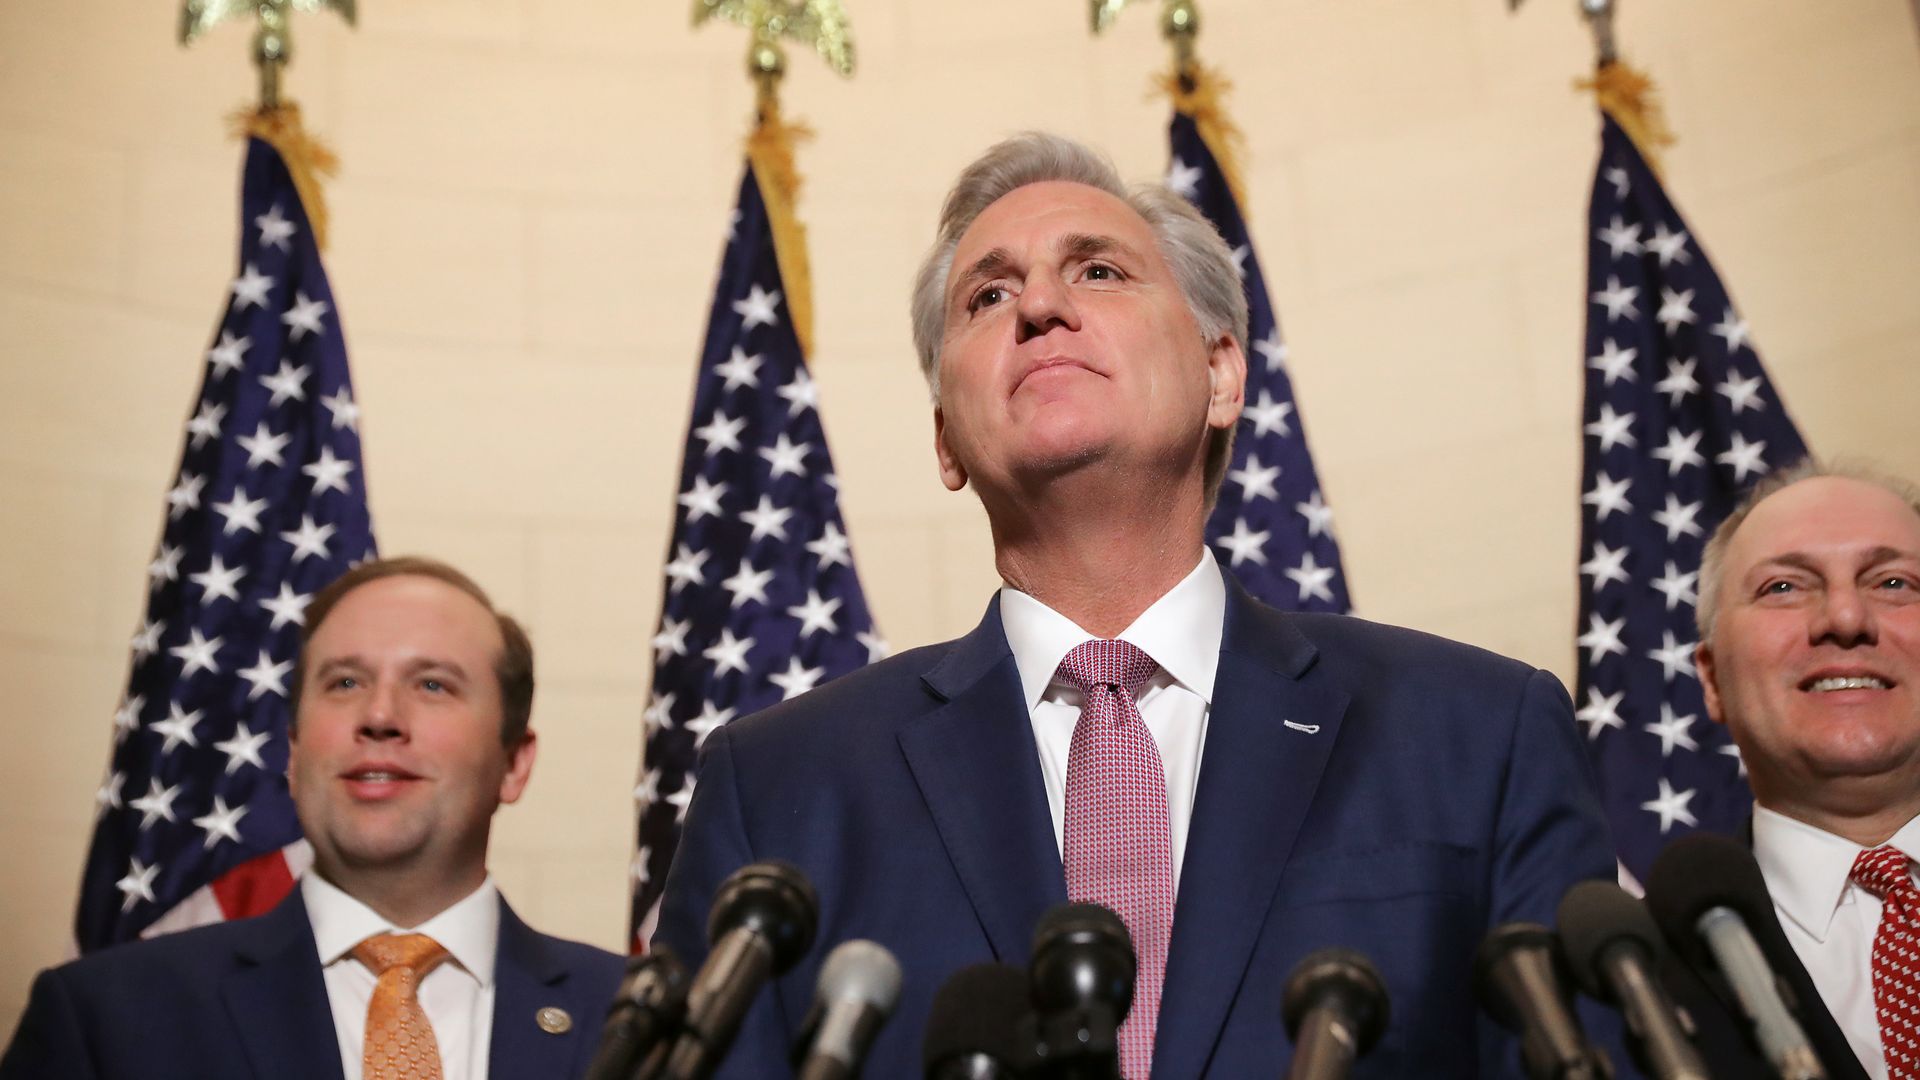 Rep. Jason Smith is seen with House Minority Leader Kevin McCarthy during a news conference.